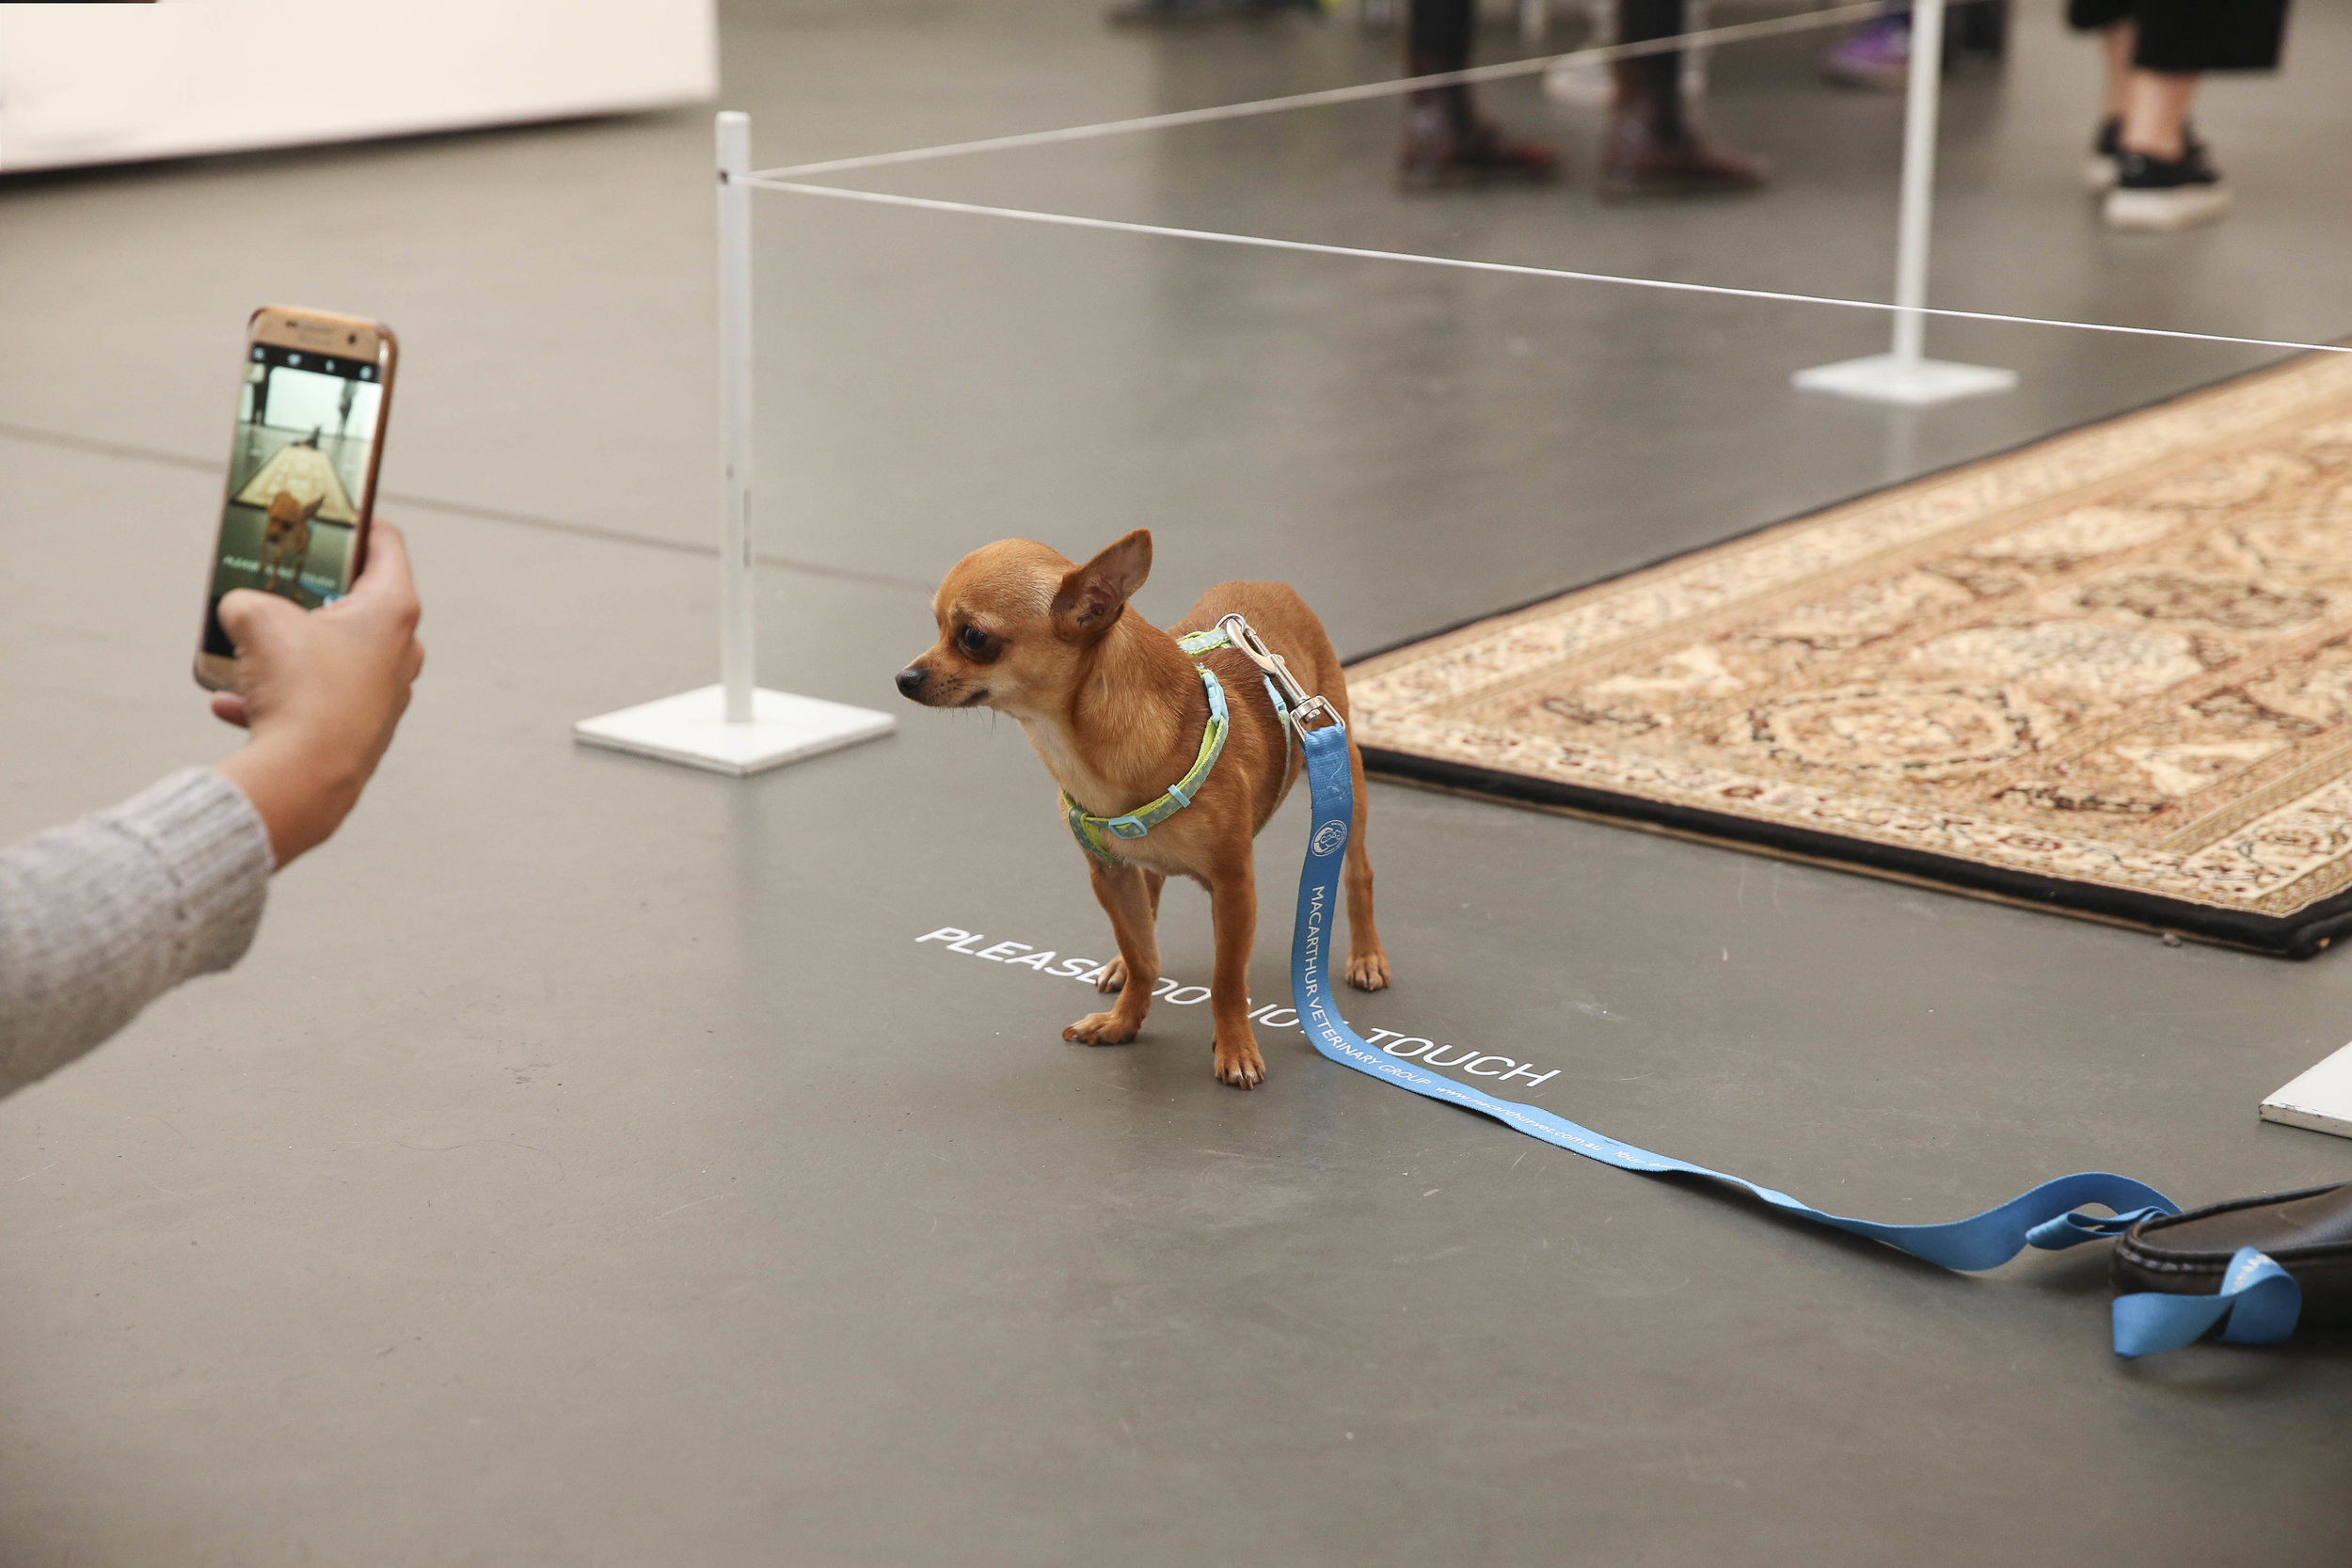  Visitors at the exhibition launch,  Every Dog Will Have its Day,  2017, Casula Powerhouse Arts Centre, Sydney. Photo: Andrea Todic 